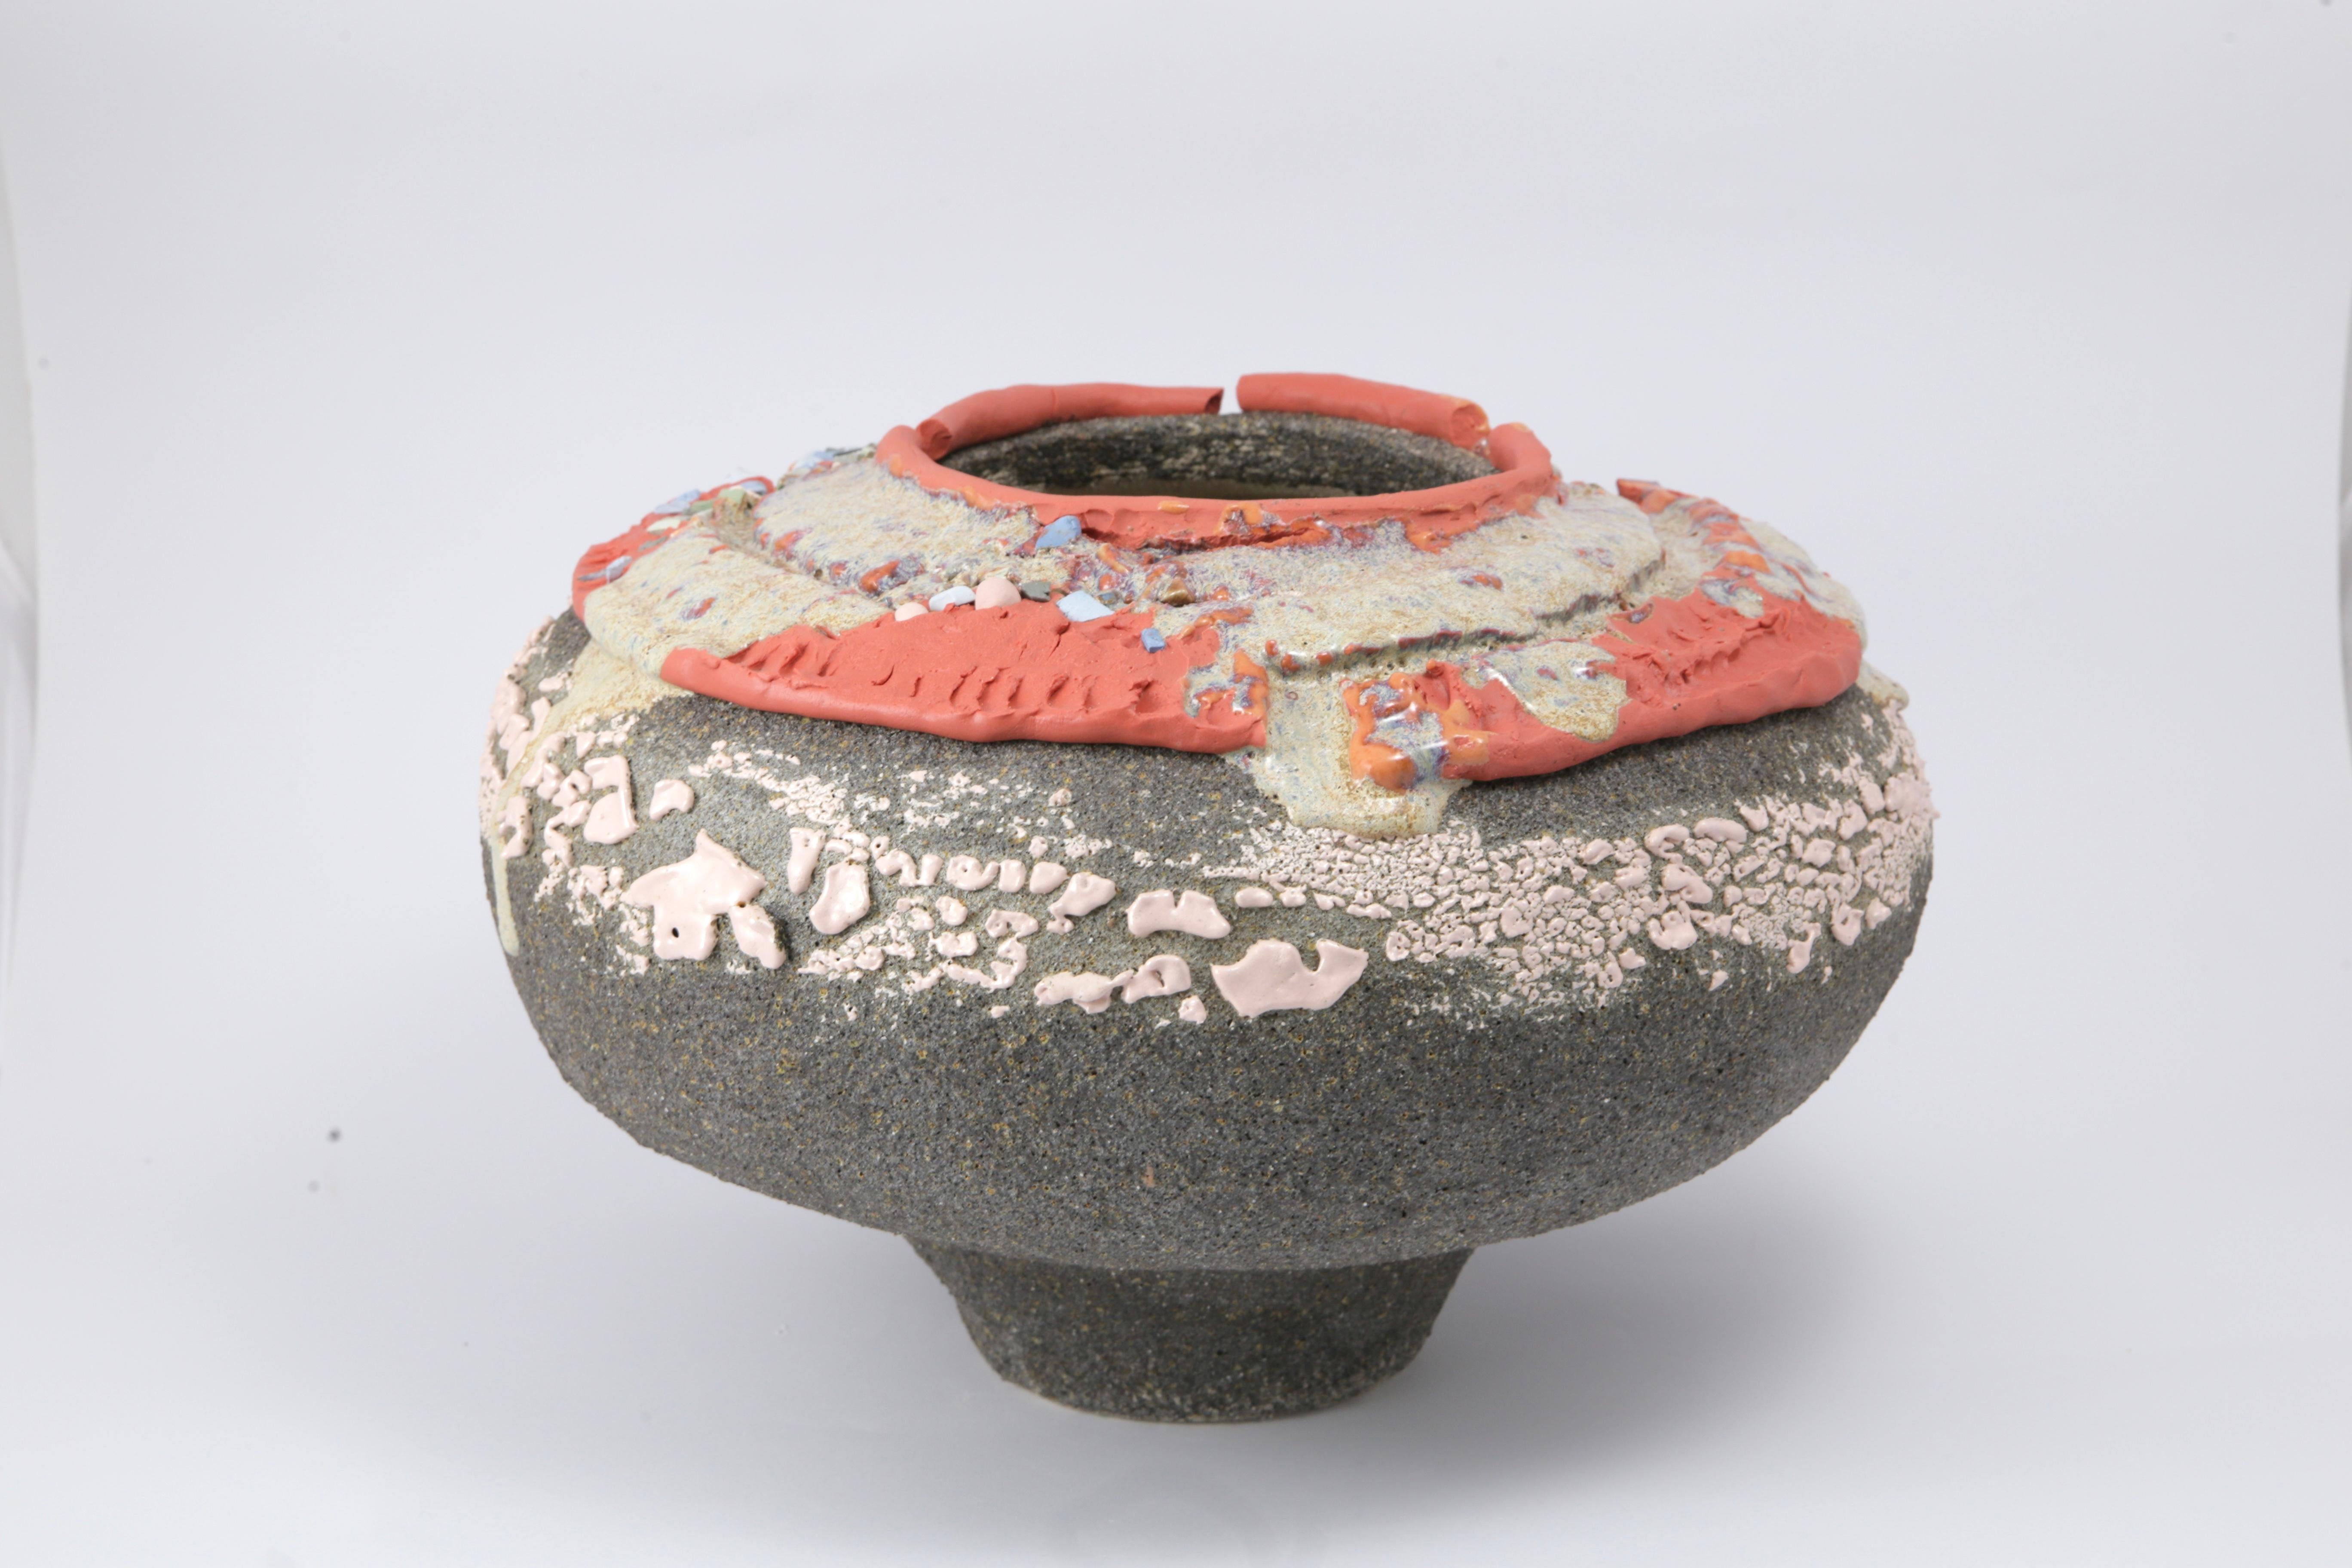 Sprinkle vase by Arina Antonova
Dimensions: H 23 x D 36 cm
Materials: Stoneware, wild clay, porcelain, glaze

Born in Sewastopol (Crimea), I was surrounded by the natural variety of the coastal Black Sea views with rocky beaches and picturesque